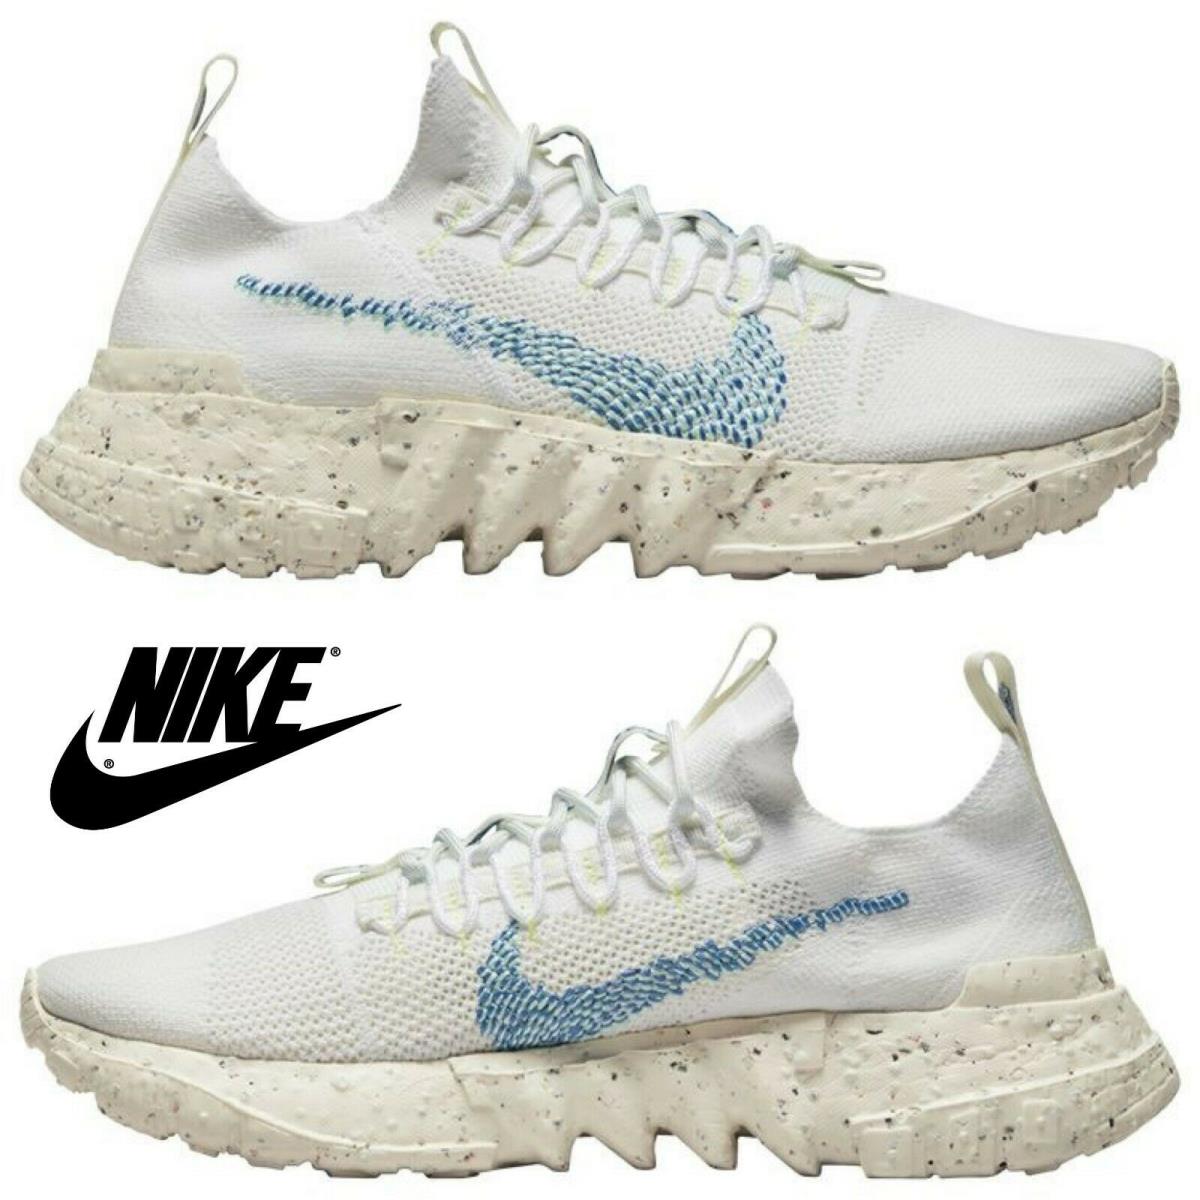 Nike Space Hippie 1 Men`s Casual Shoes Running Athletic Comfort Sport White Blue - White , White/Blue Manufacturer